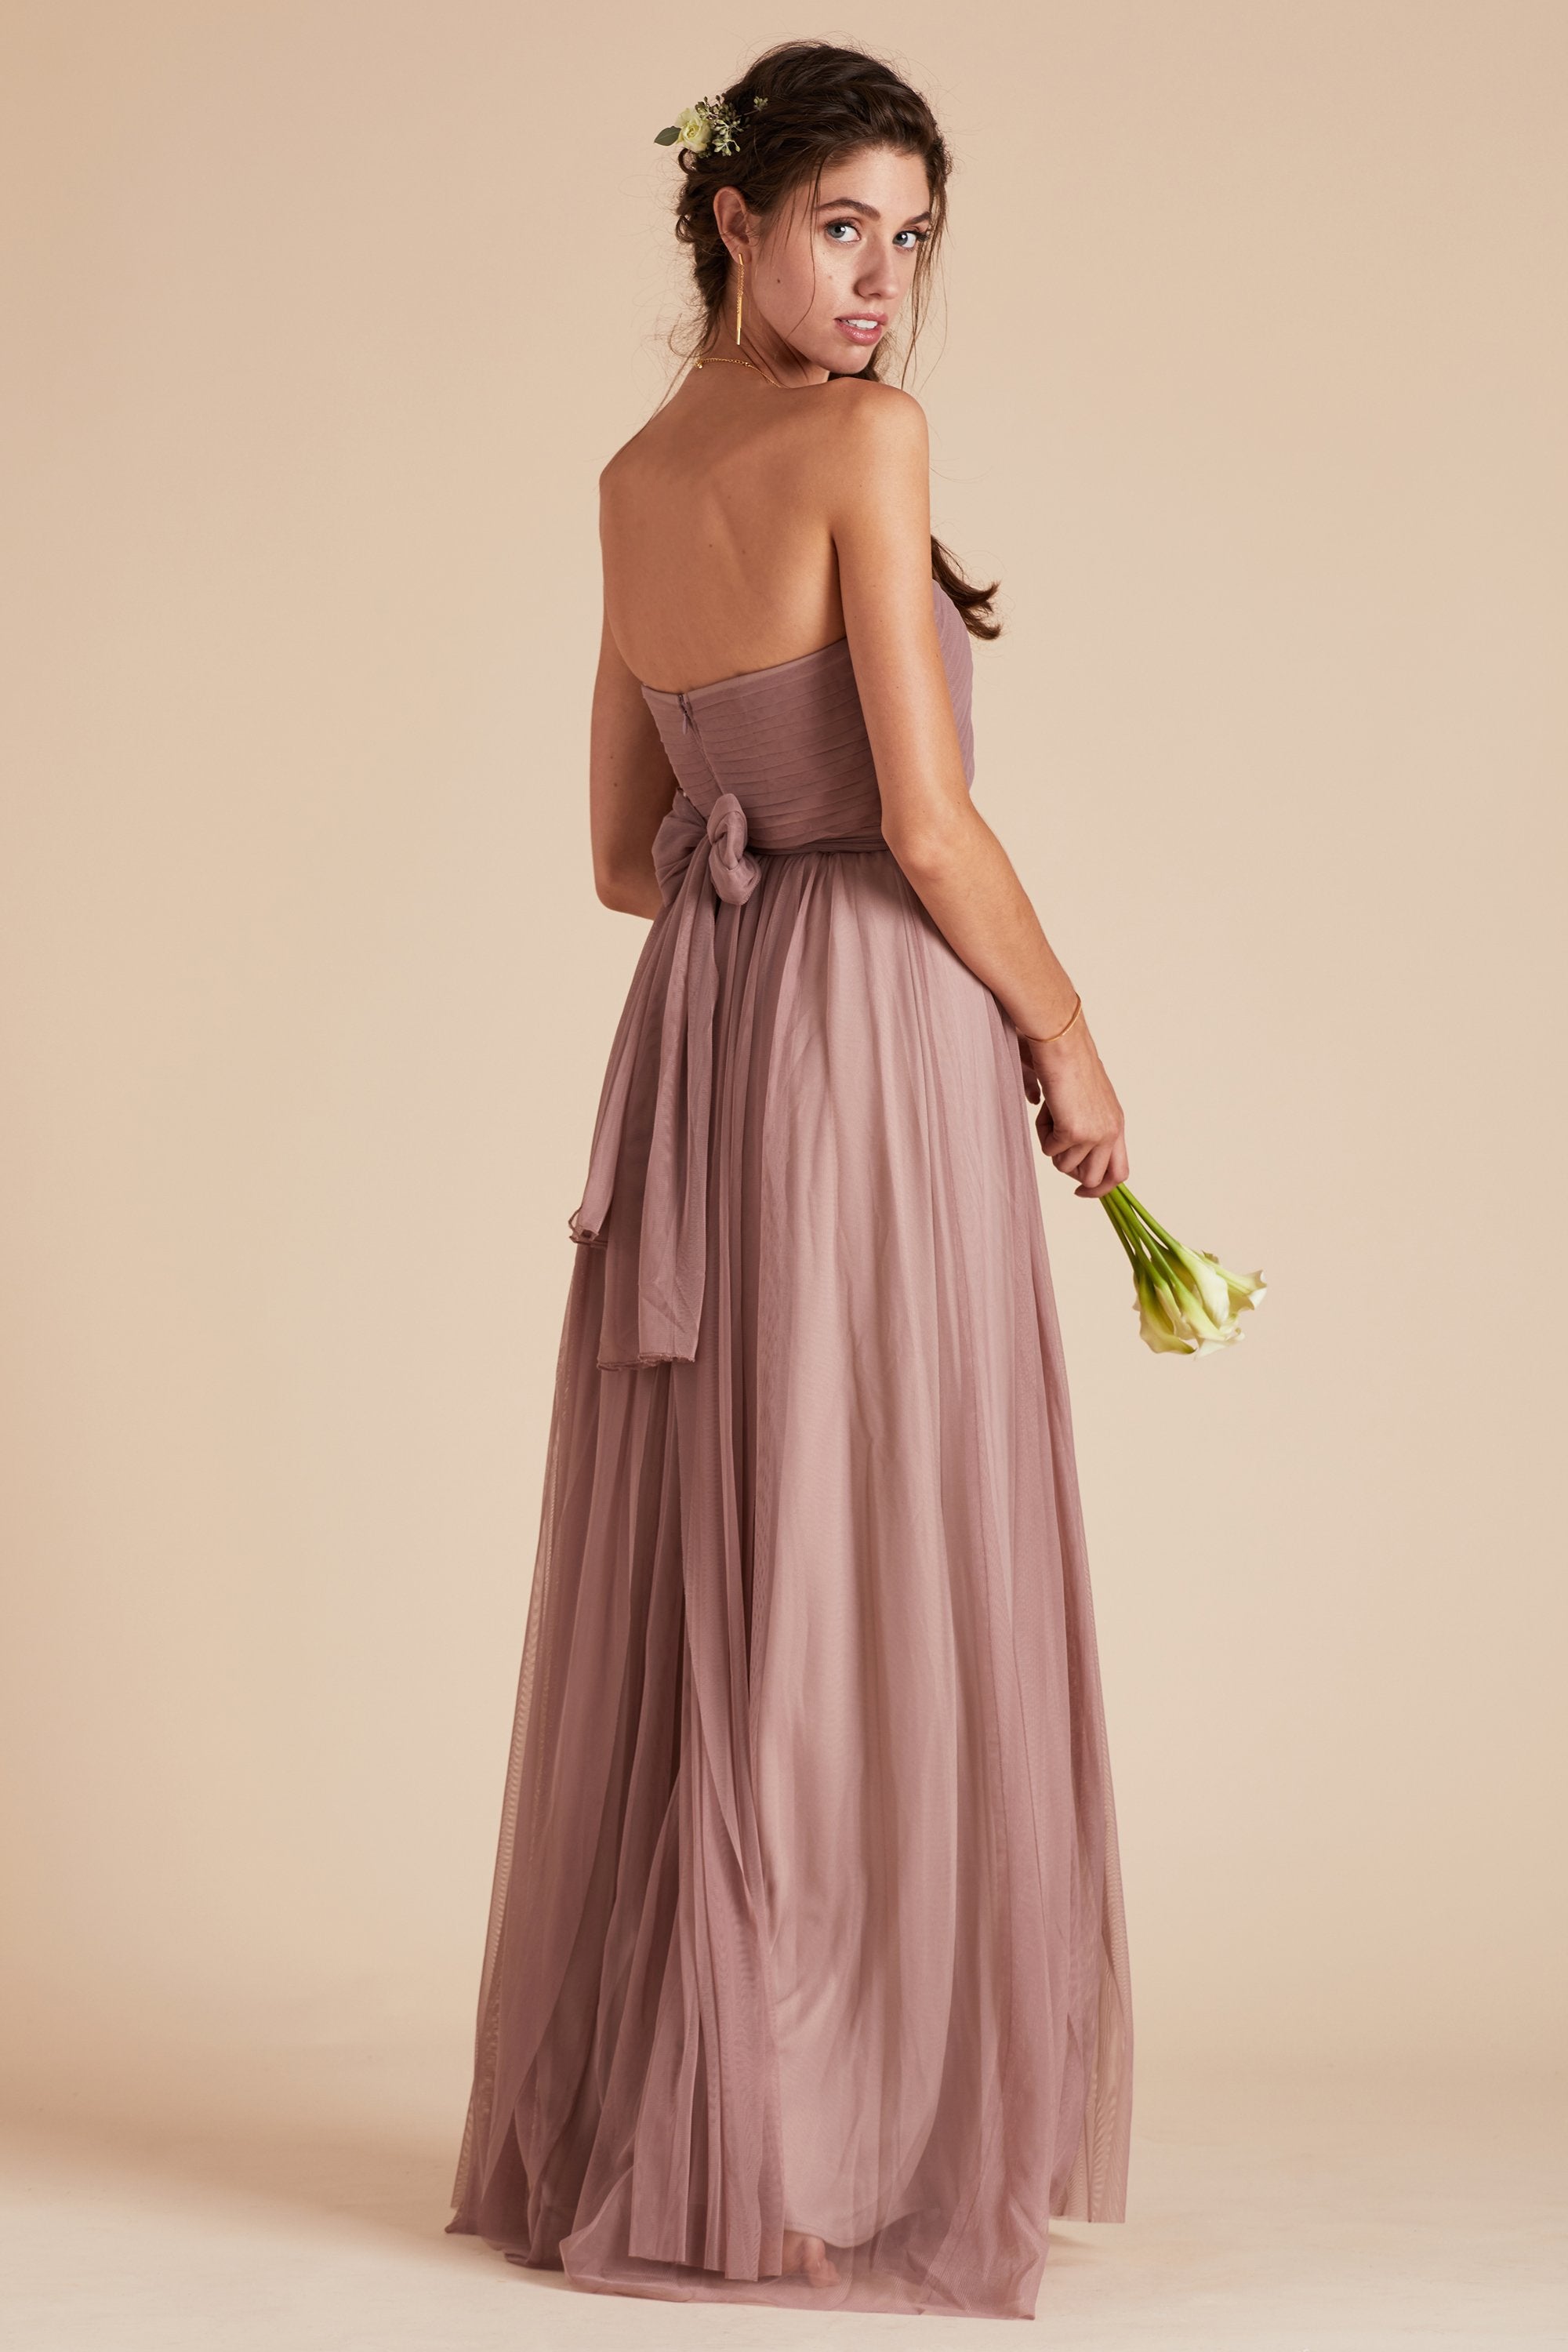 Christina convertible bridesmaid dress in sandy mauve tulle by Birdy Grey, back view